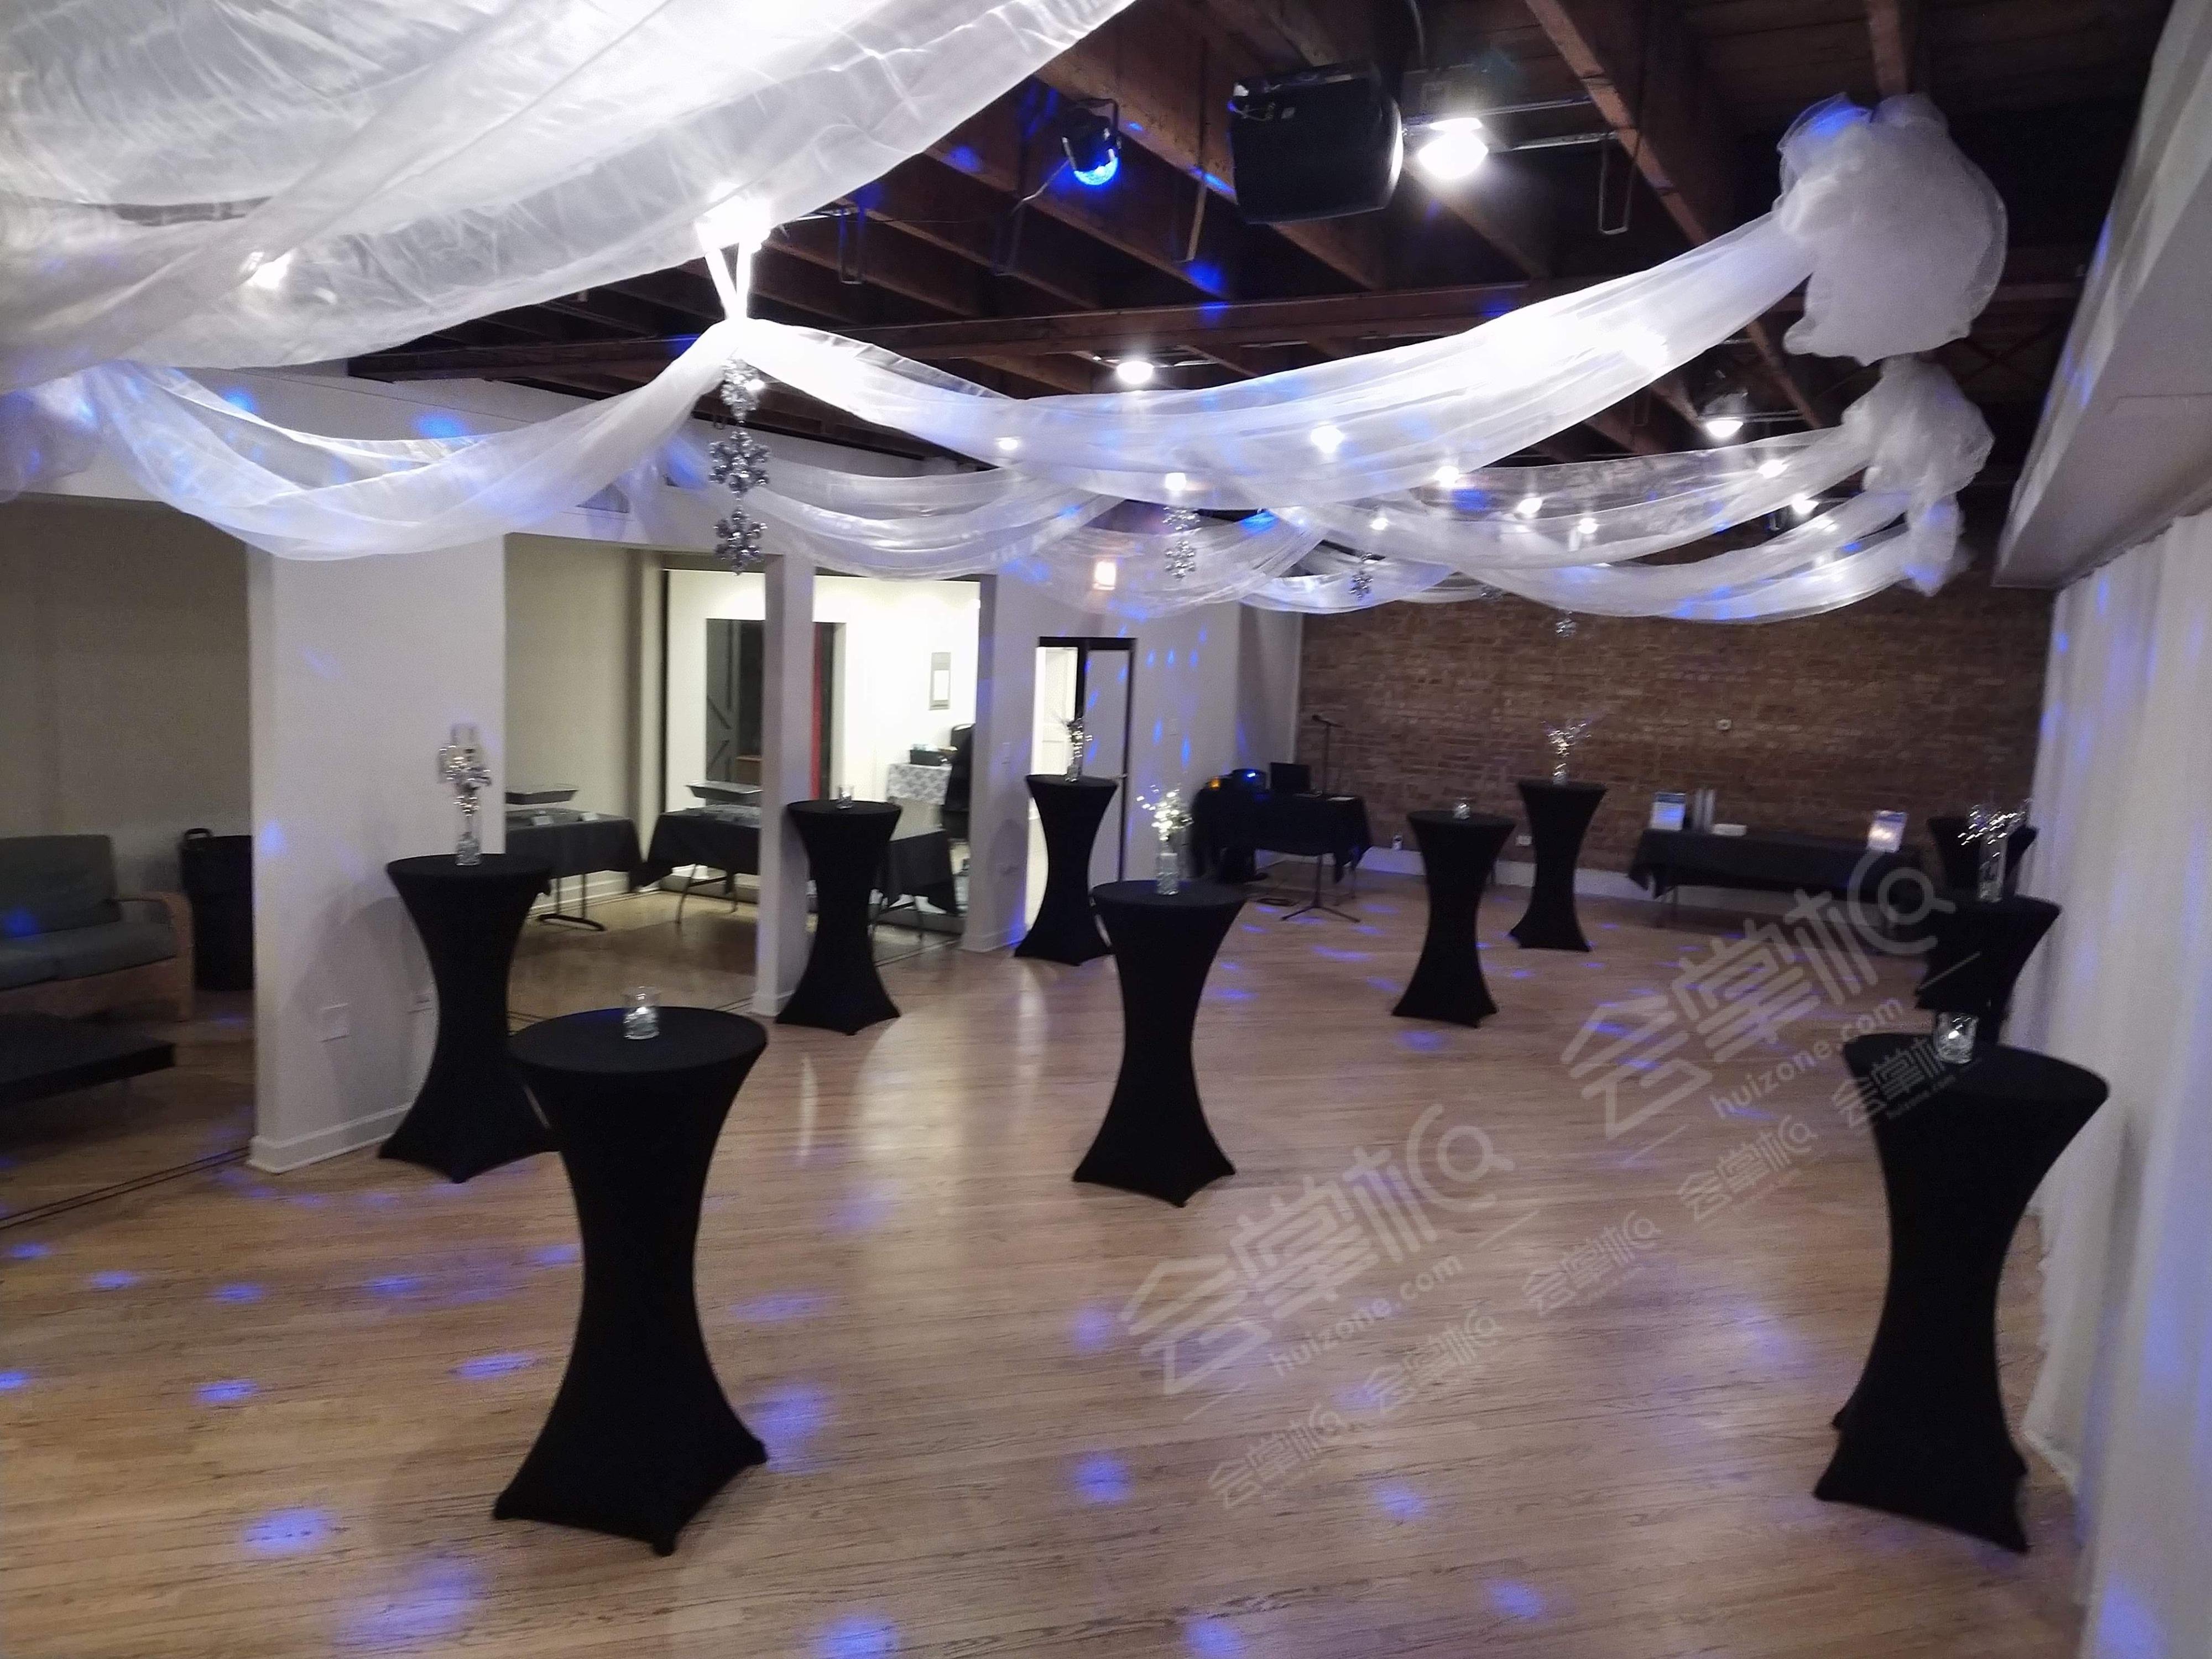 Irving Park Dance Studio and Event Space - Party Rental